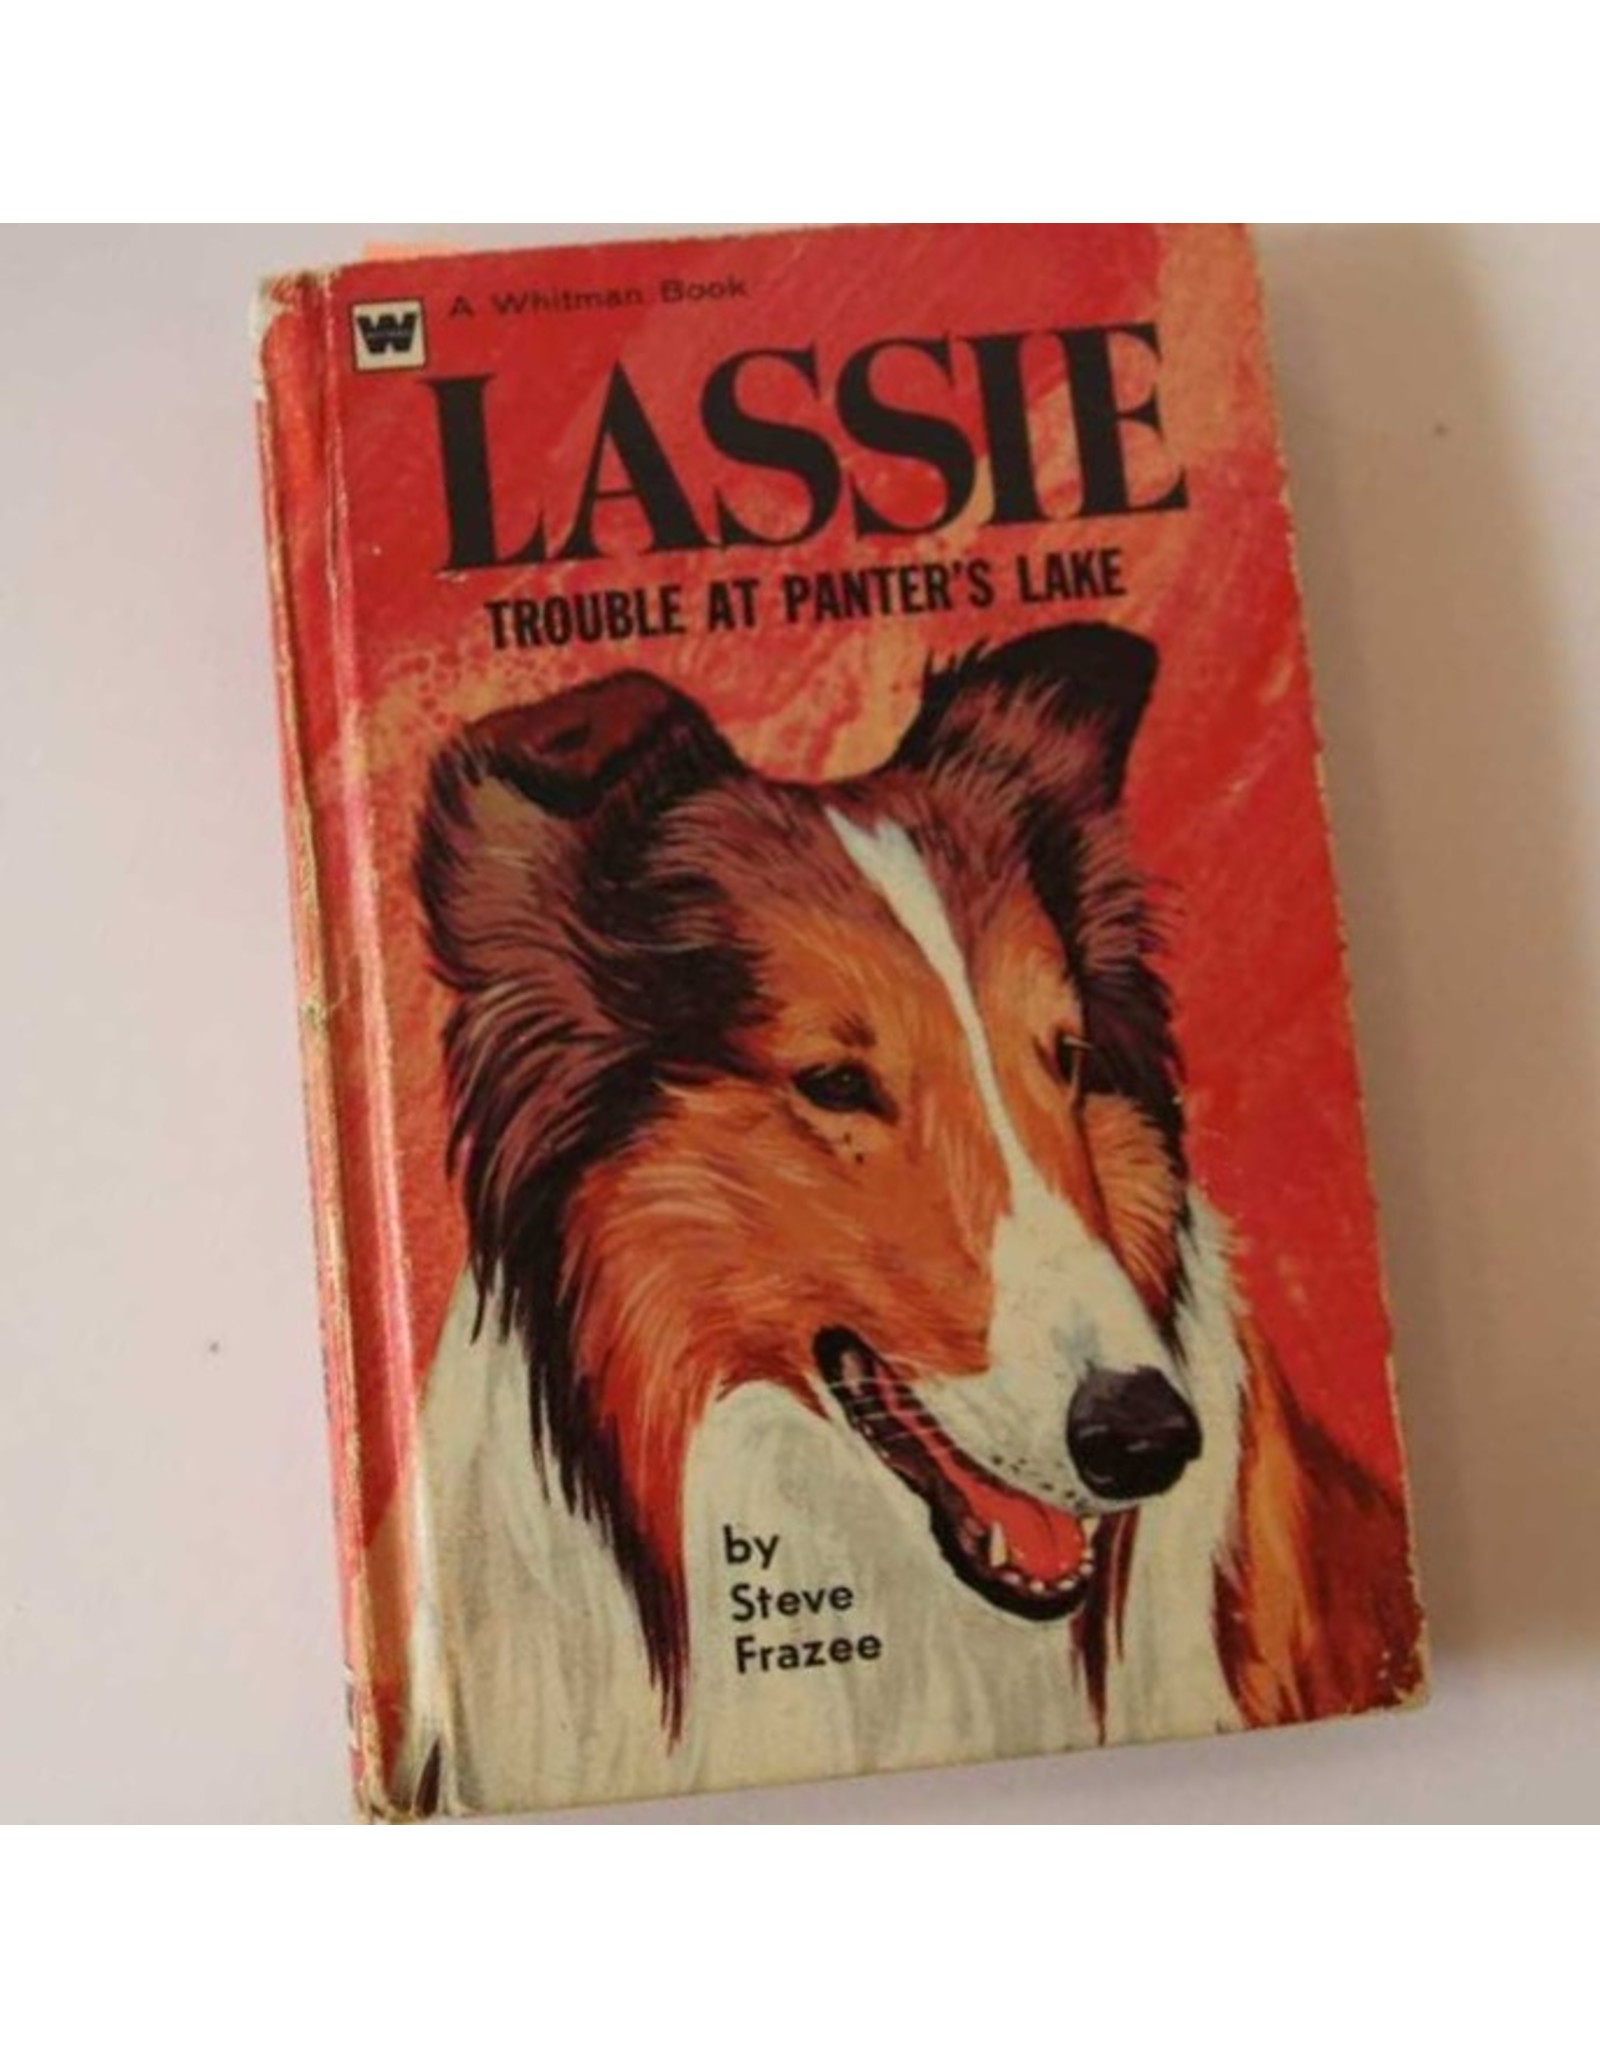 Book: Lassie Trouble at Panter's Lake by Steve Frazee, hardcover. Whitman Publishing Division.